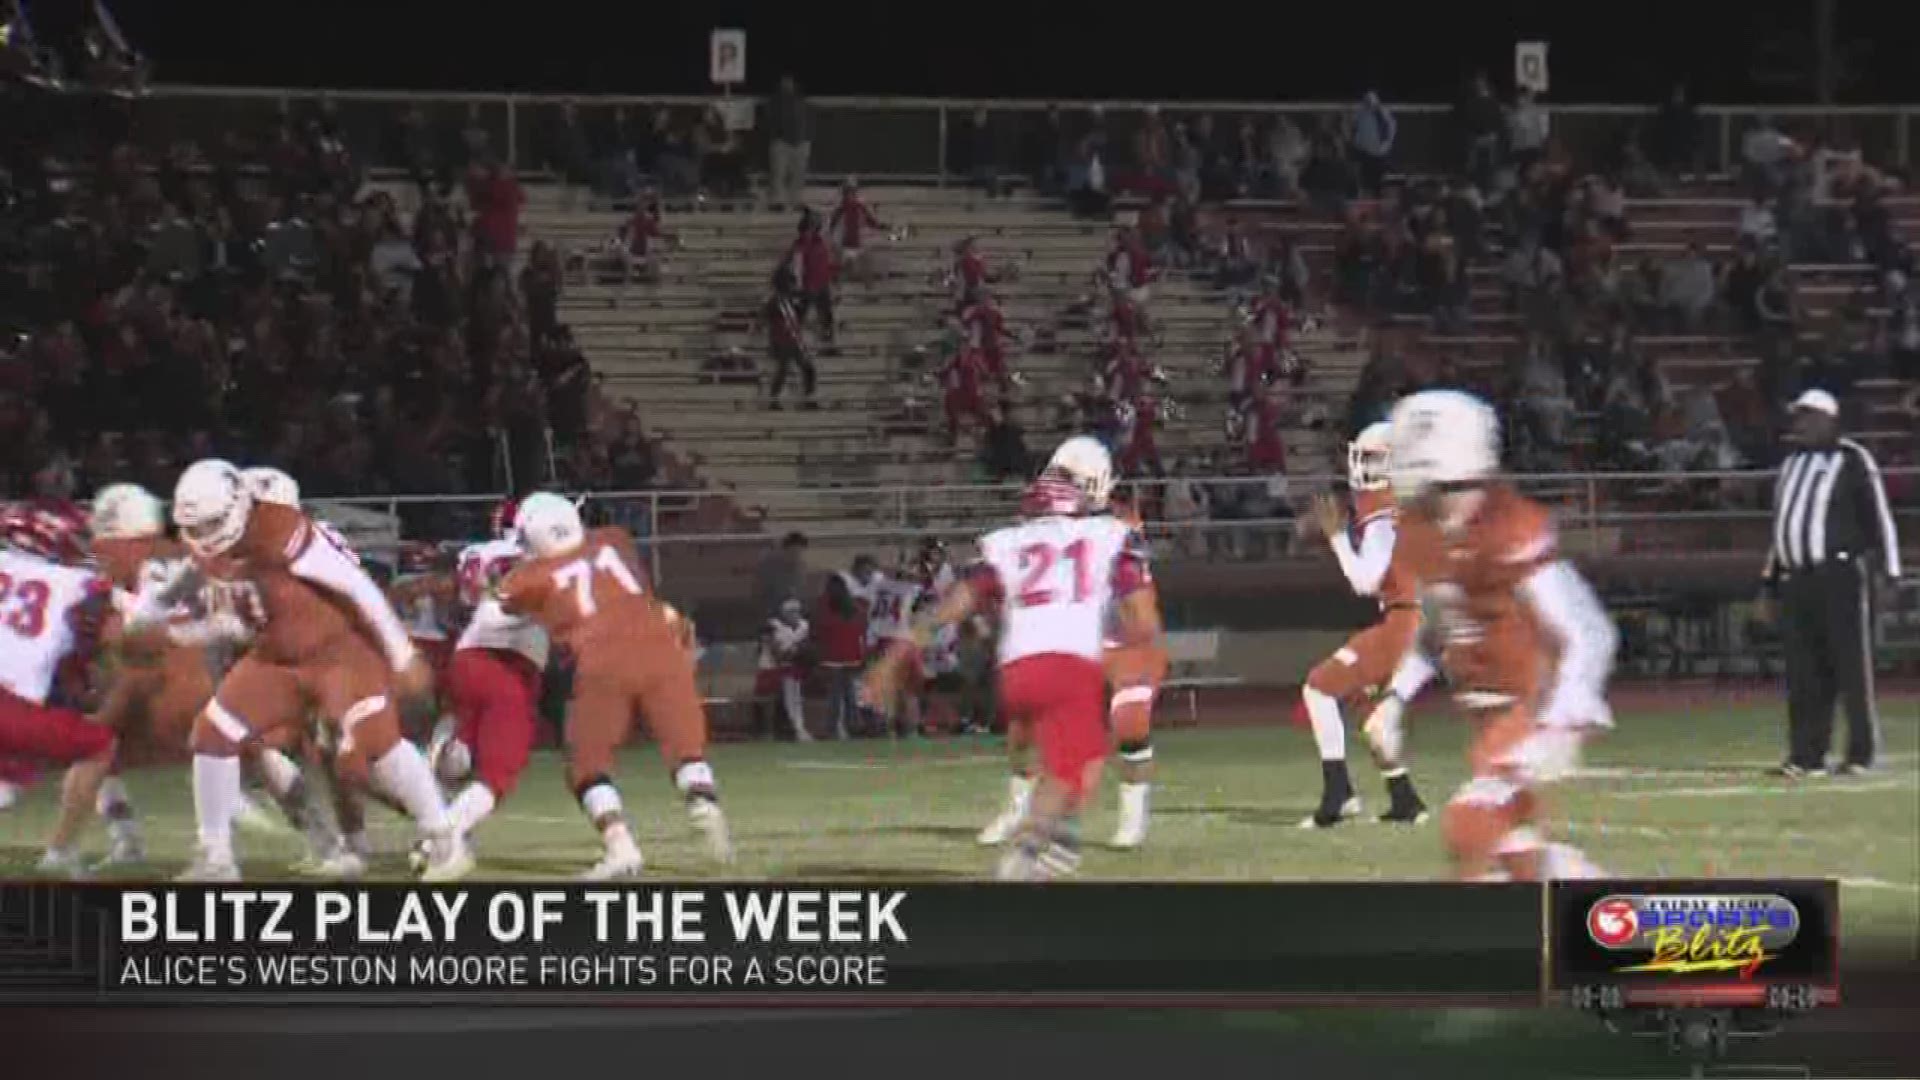 Part IV includes: Our Play of the Week from Alice's Weston Moore and look at this weekend's games and next week's Blitz.